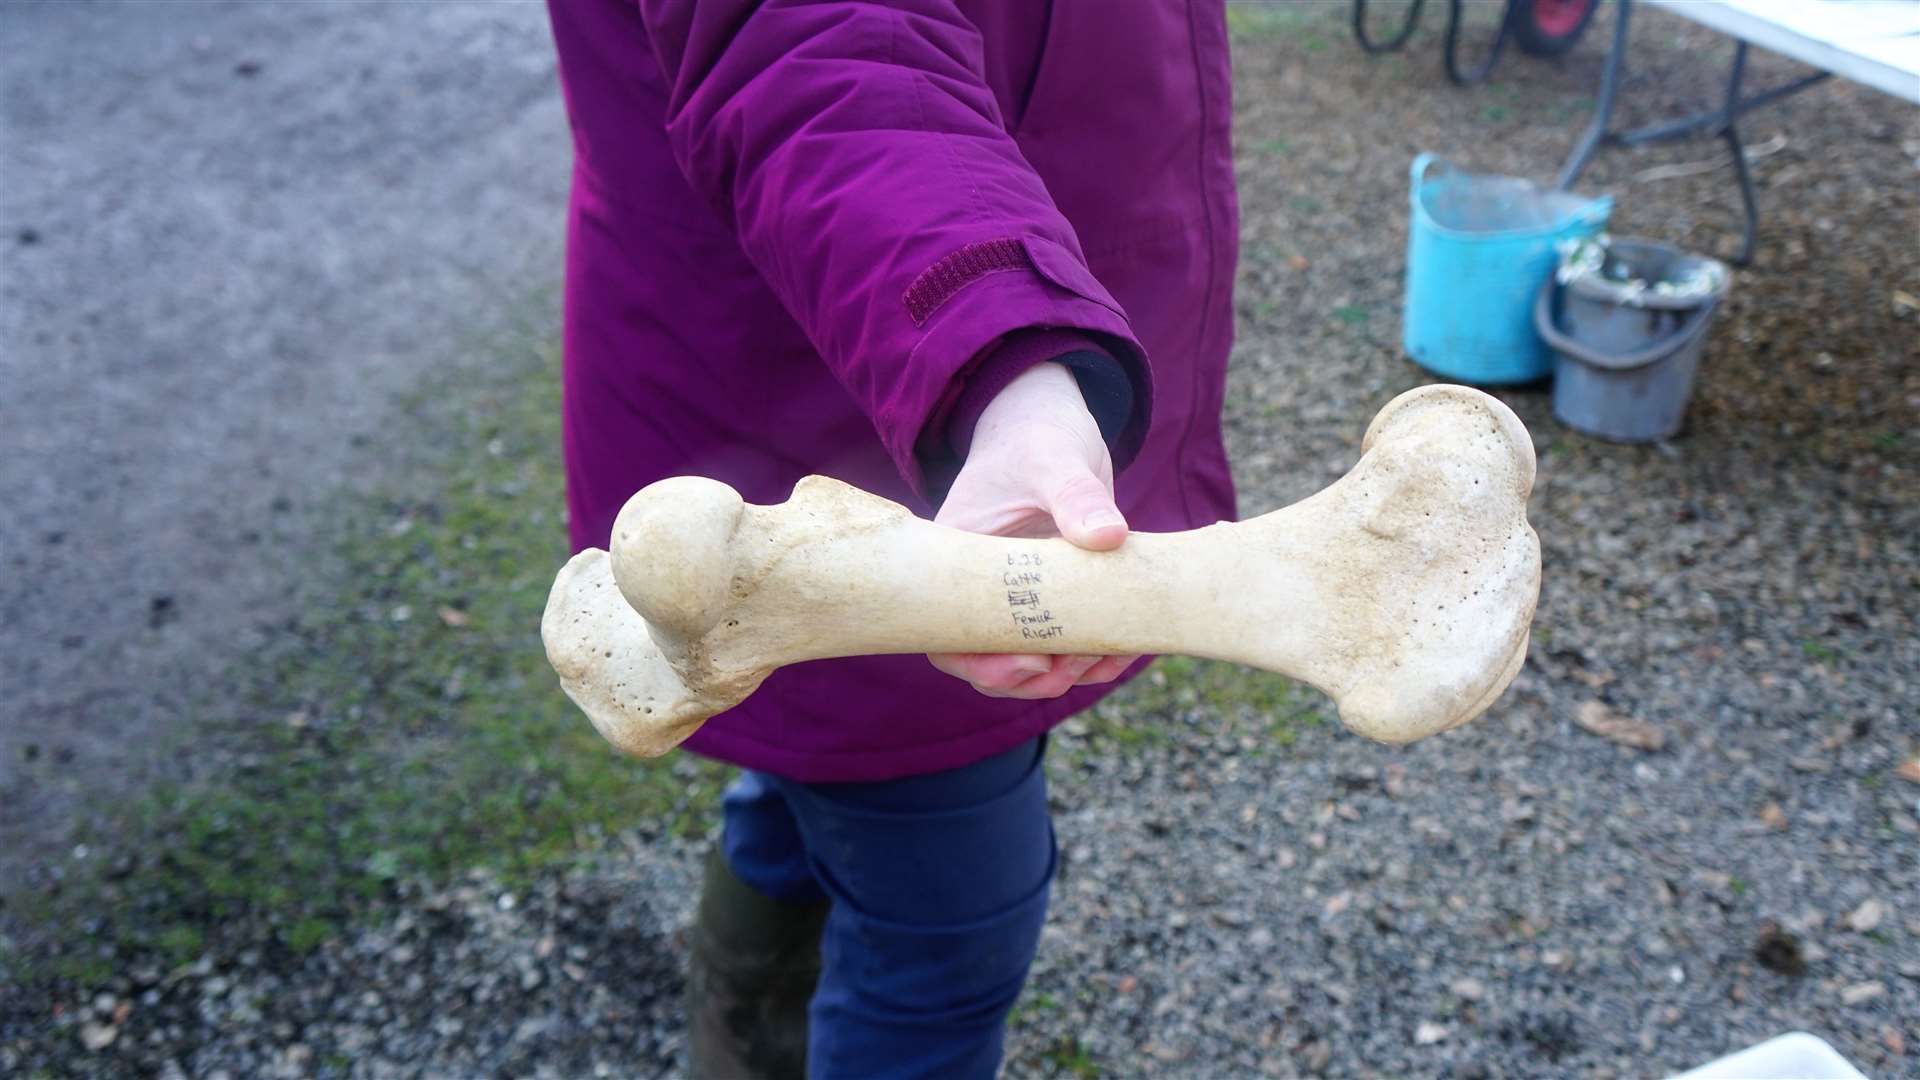 Femur bone from a cow that was found during a dig. Picture: DGS